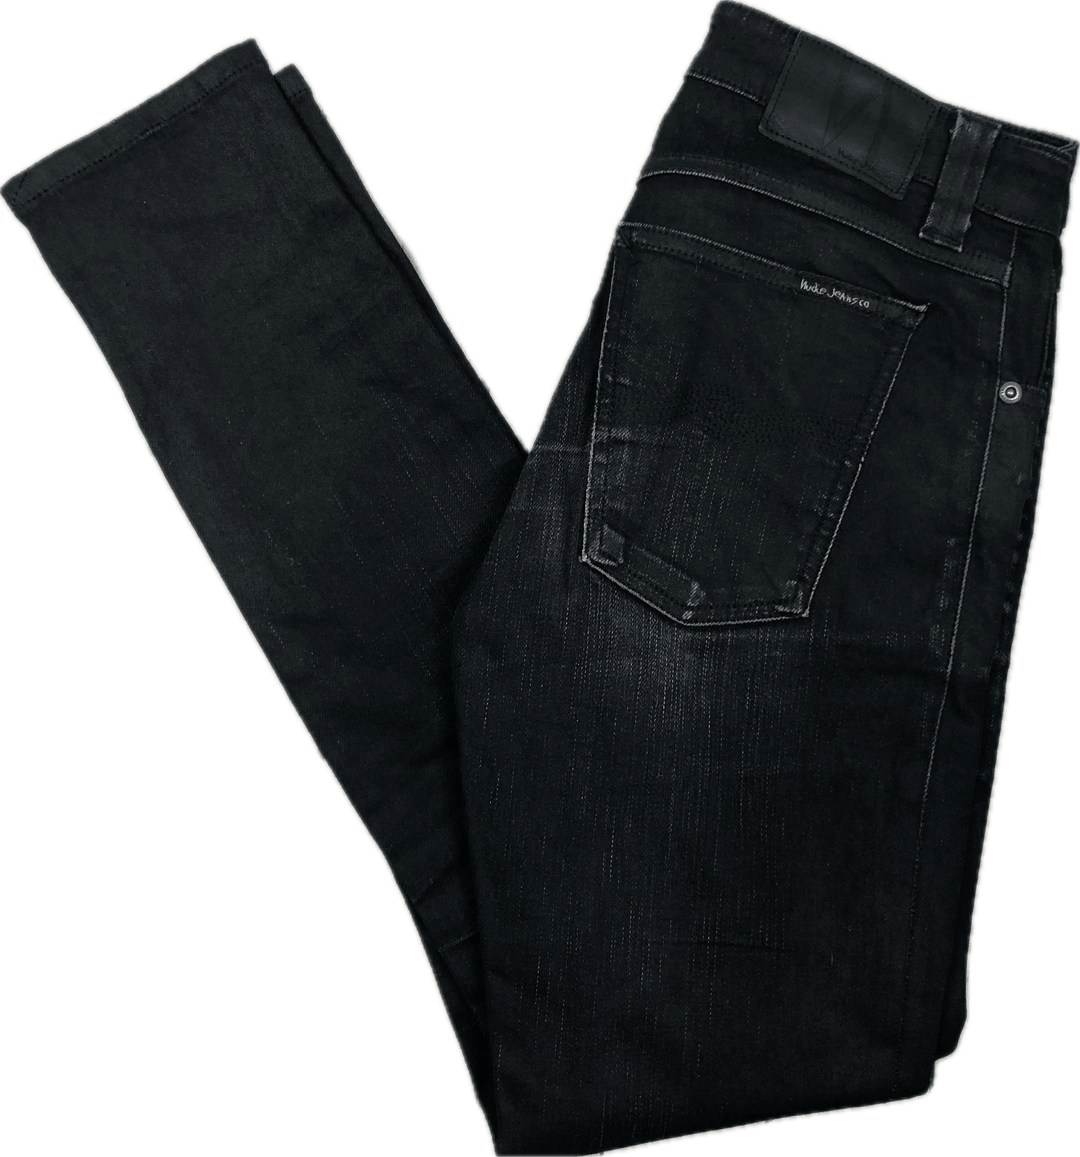 Nudie Jeans Co. Dry Black Coated Organic Cotton Jeans - Size 27/30 - Jean Pool